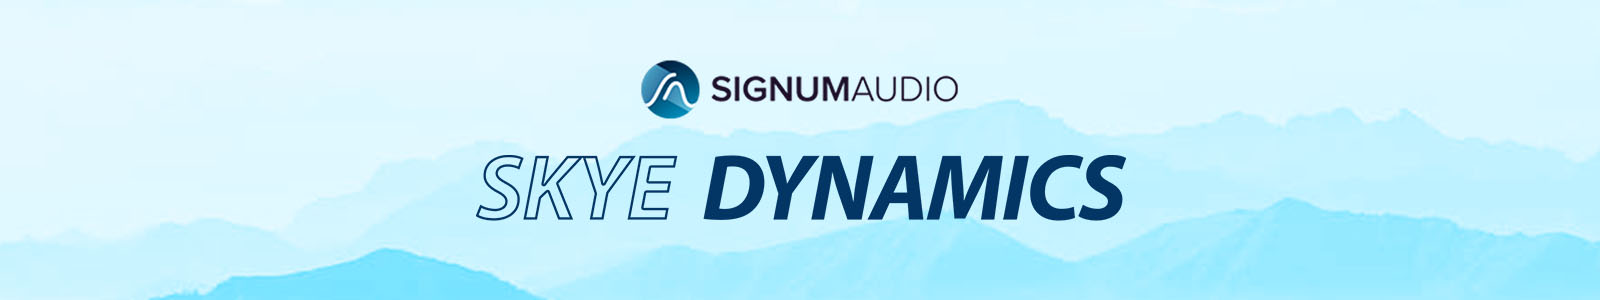 Skye Dynamics Stereo by Signum Audio